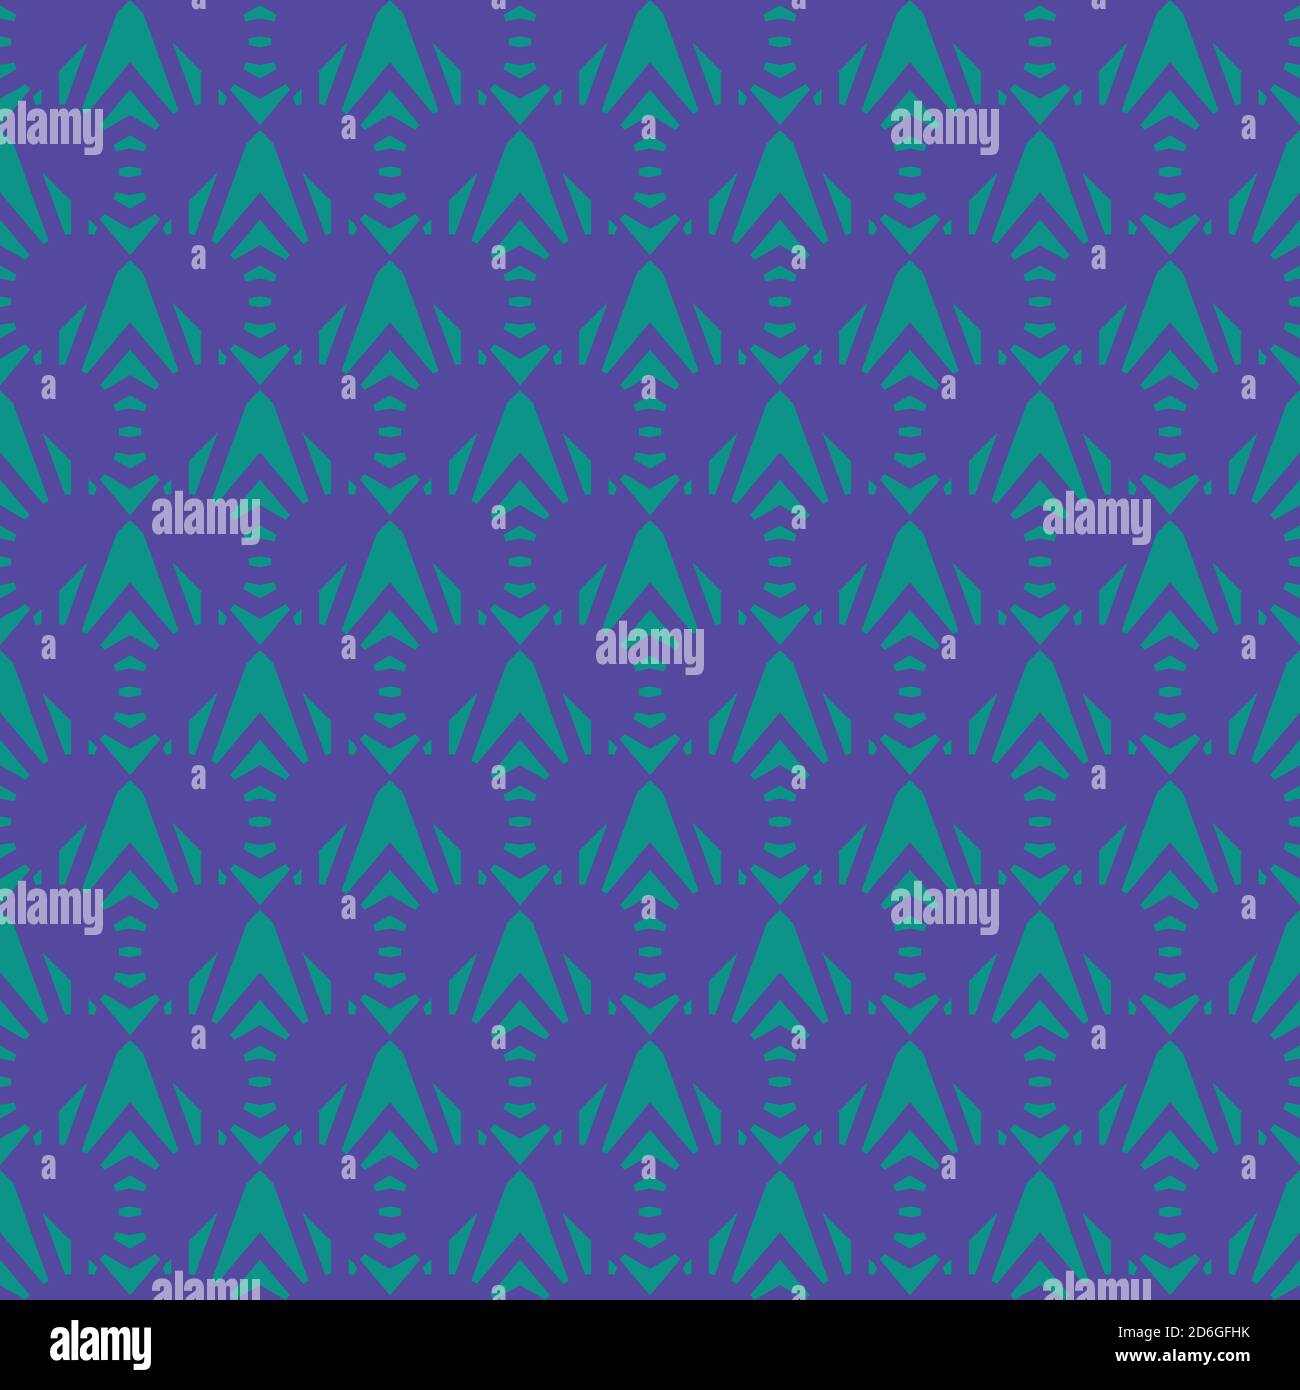 Vector seamless pattern texture background with geometric shapes, colored in blue and green colors. Stock Vector